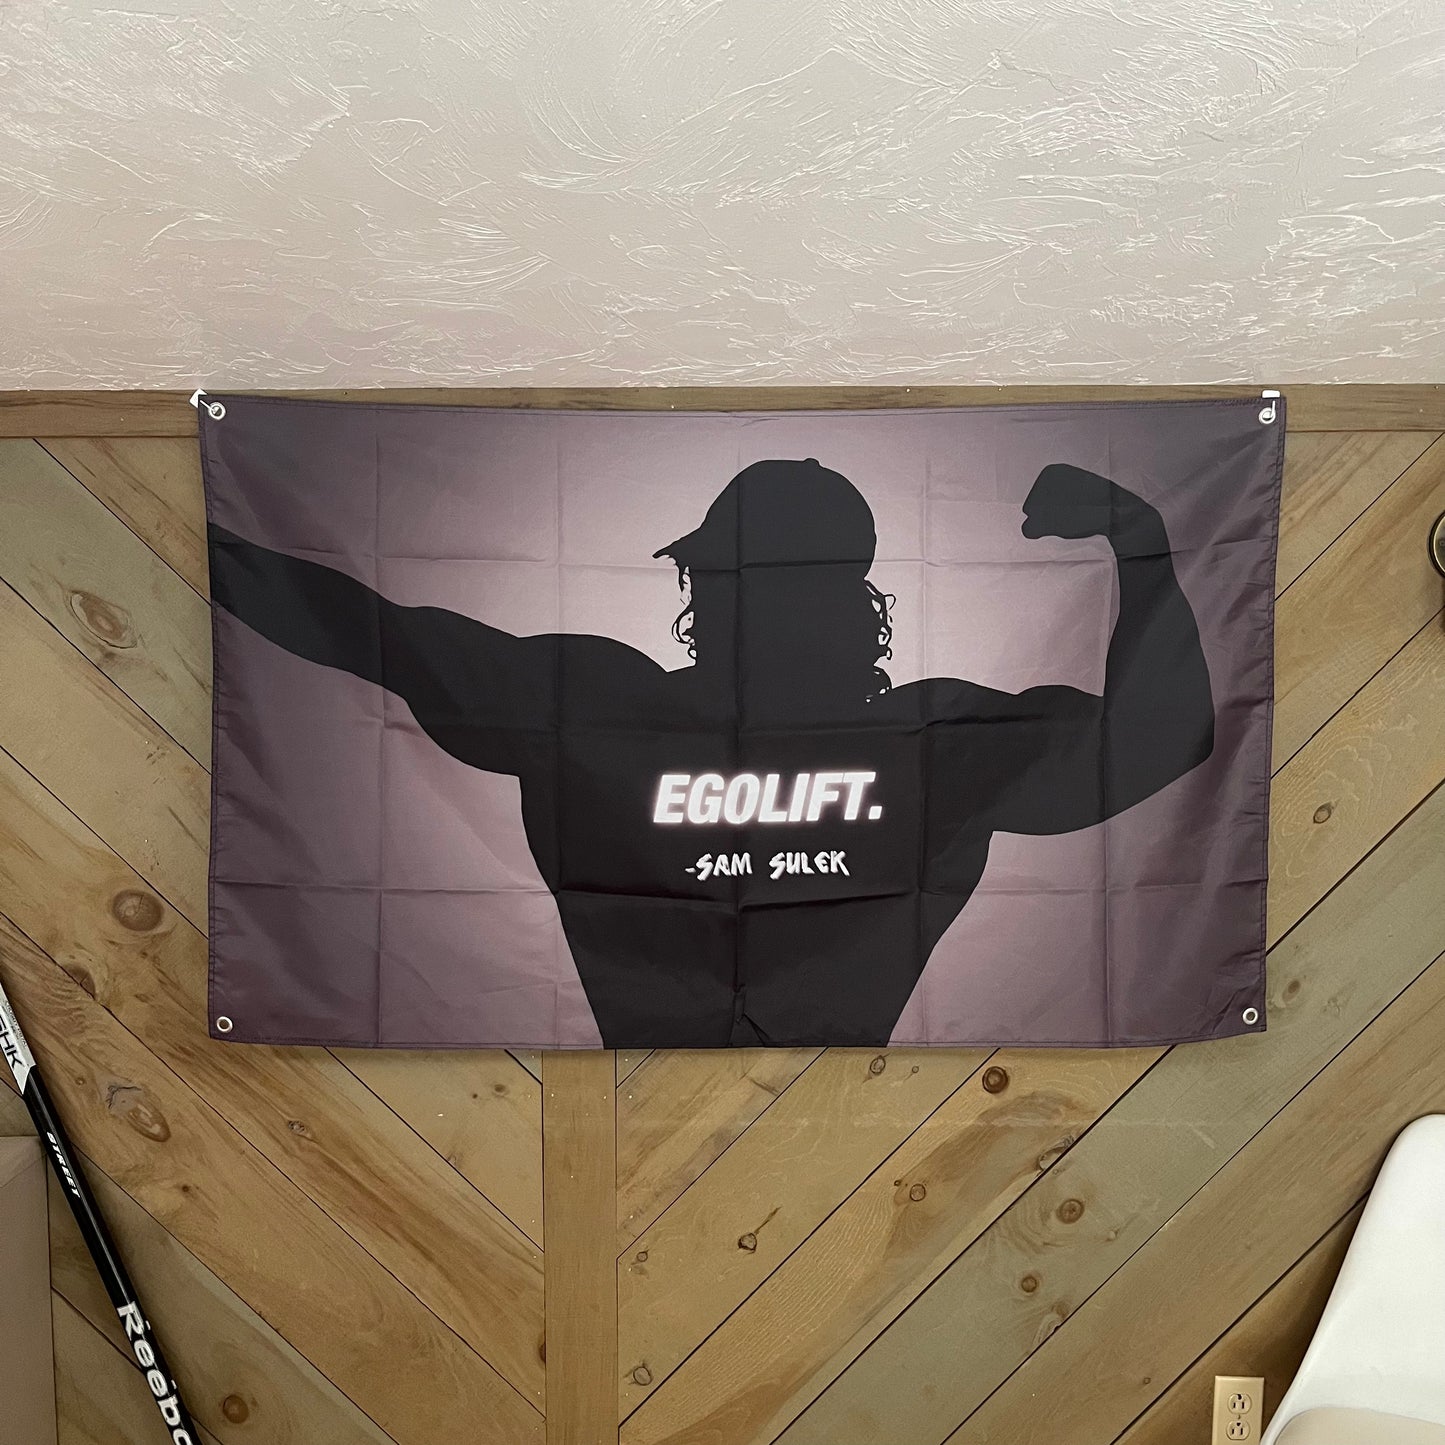 A gym setting with the Sam Sulek flag displayed on the wall, illustrating its motivational impact and how it enhances the environment for fitness and bodybuilding enthusiasts.